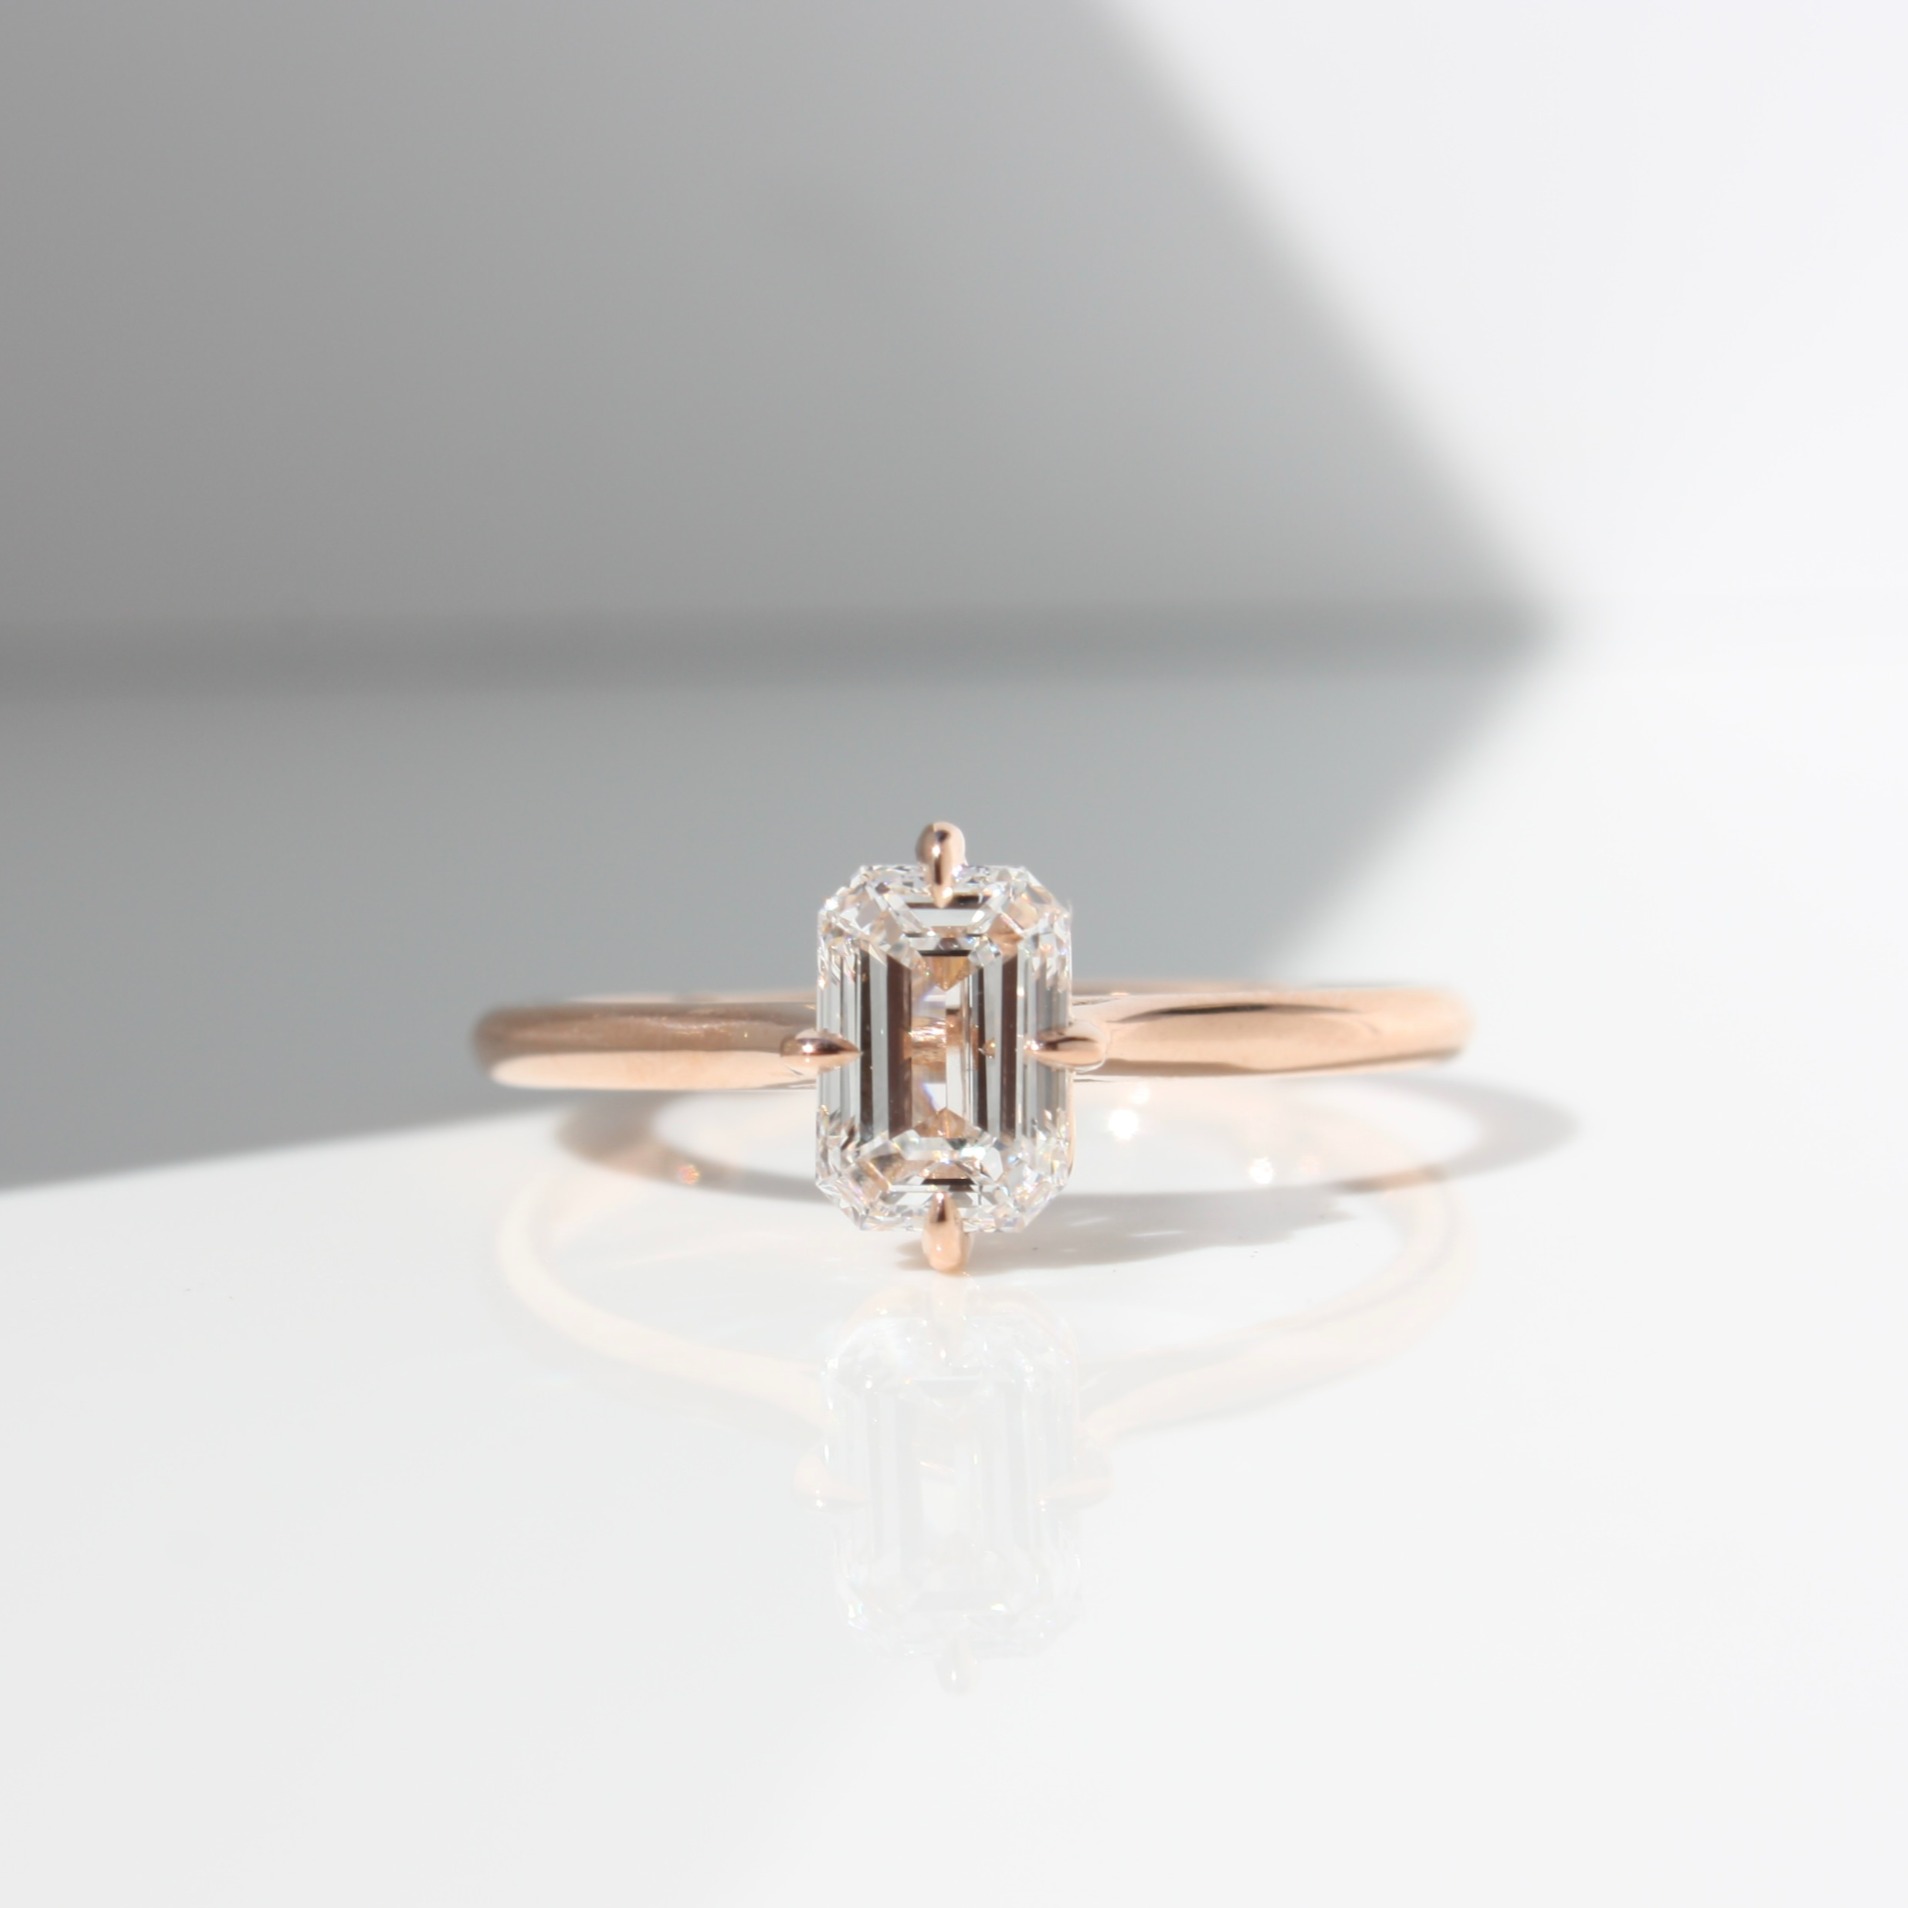 Emerald Cut Compass Solitaire Ring, engagement ring, diamond engagement ring, emerald cut diamond, lab grown diamond, solitaire ring, danielle camera jewellery